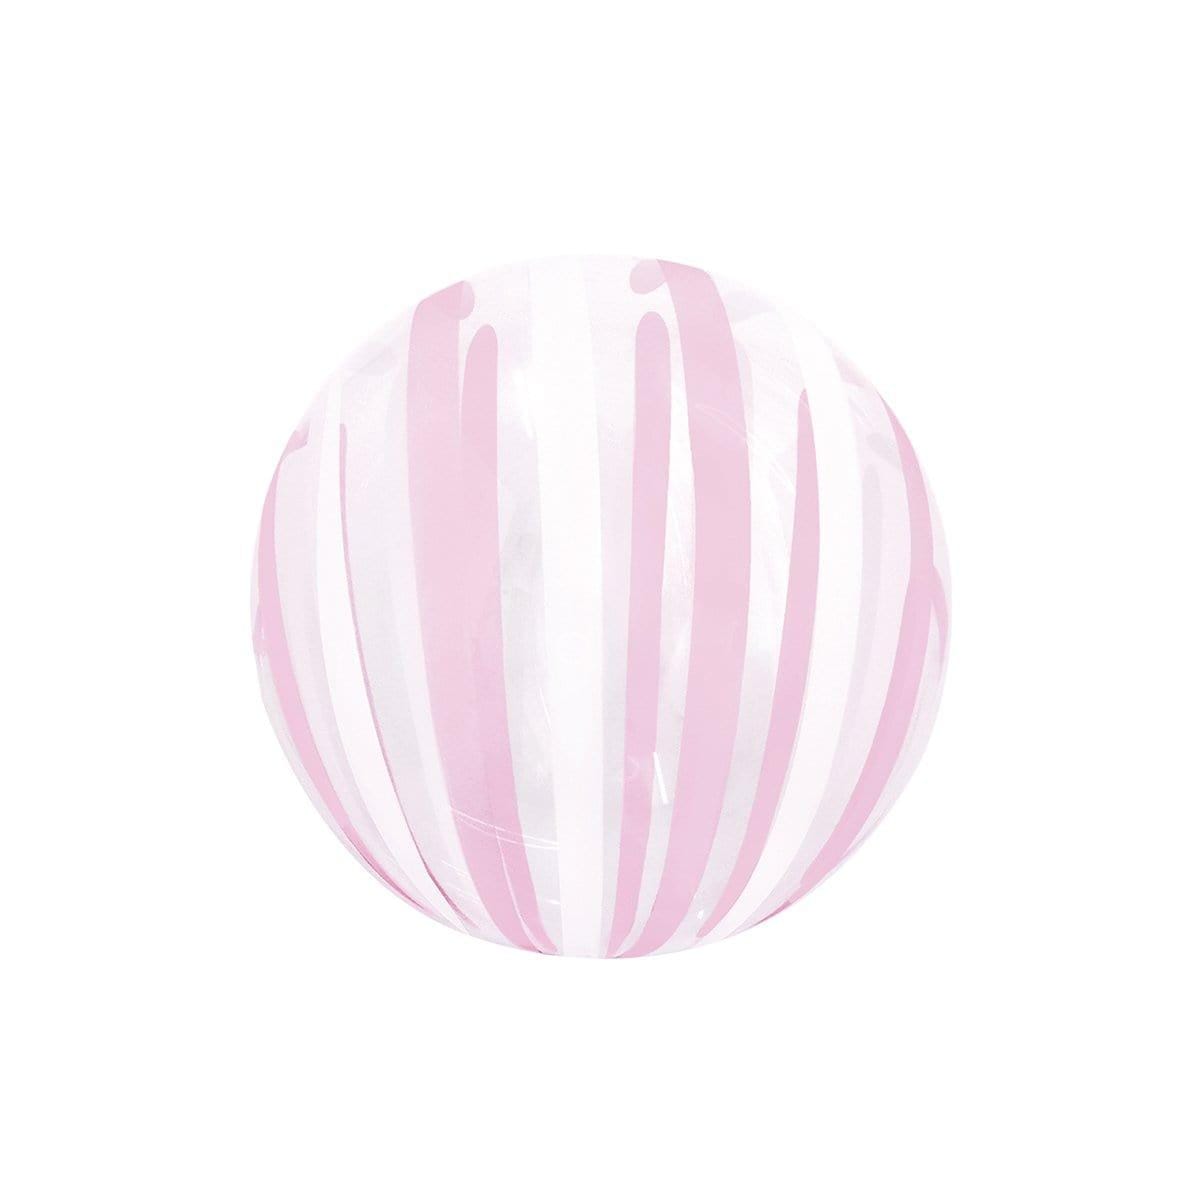 Buy Balloons Stripe Bubble Balloon, Pink & White, 18 Inches sold at Party Expert